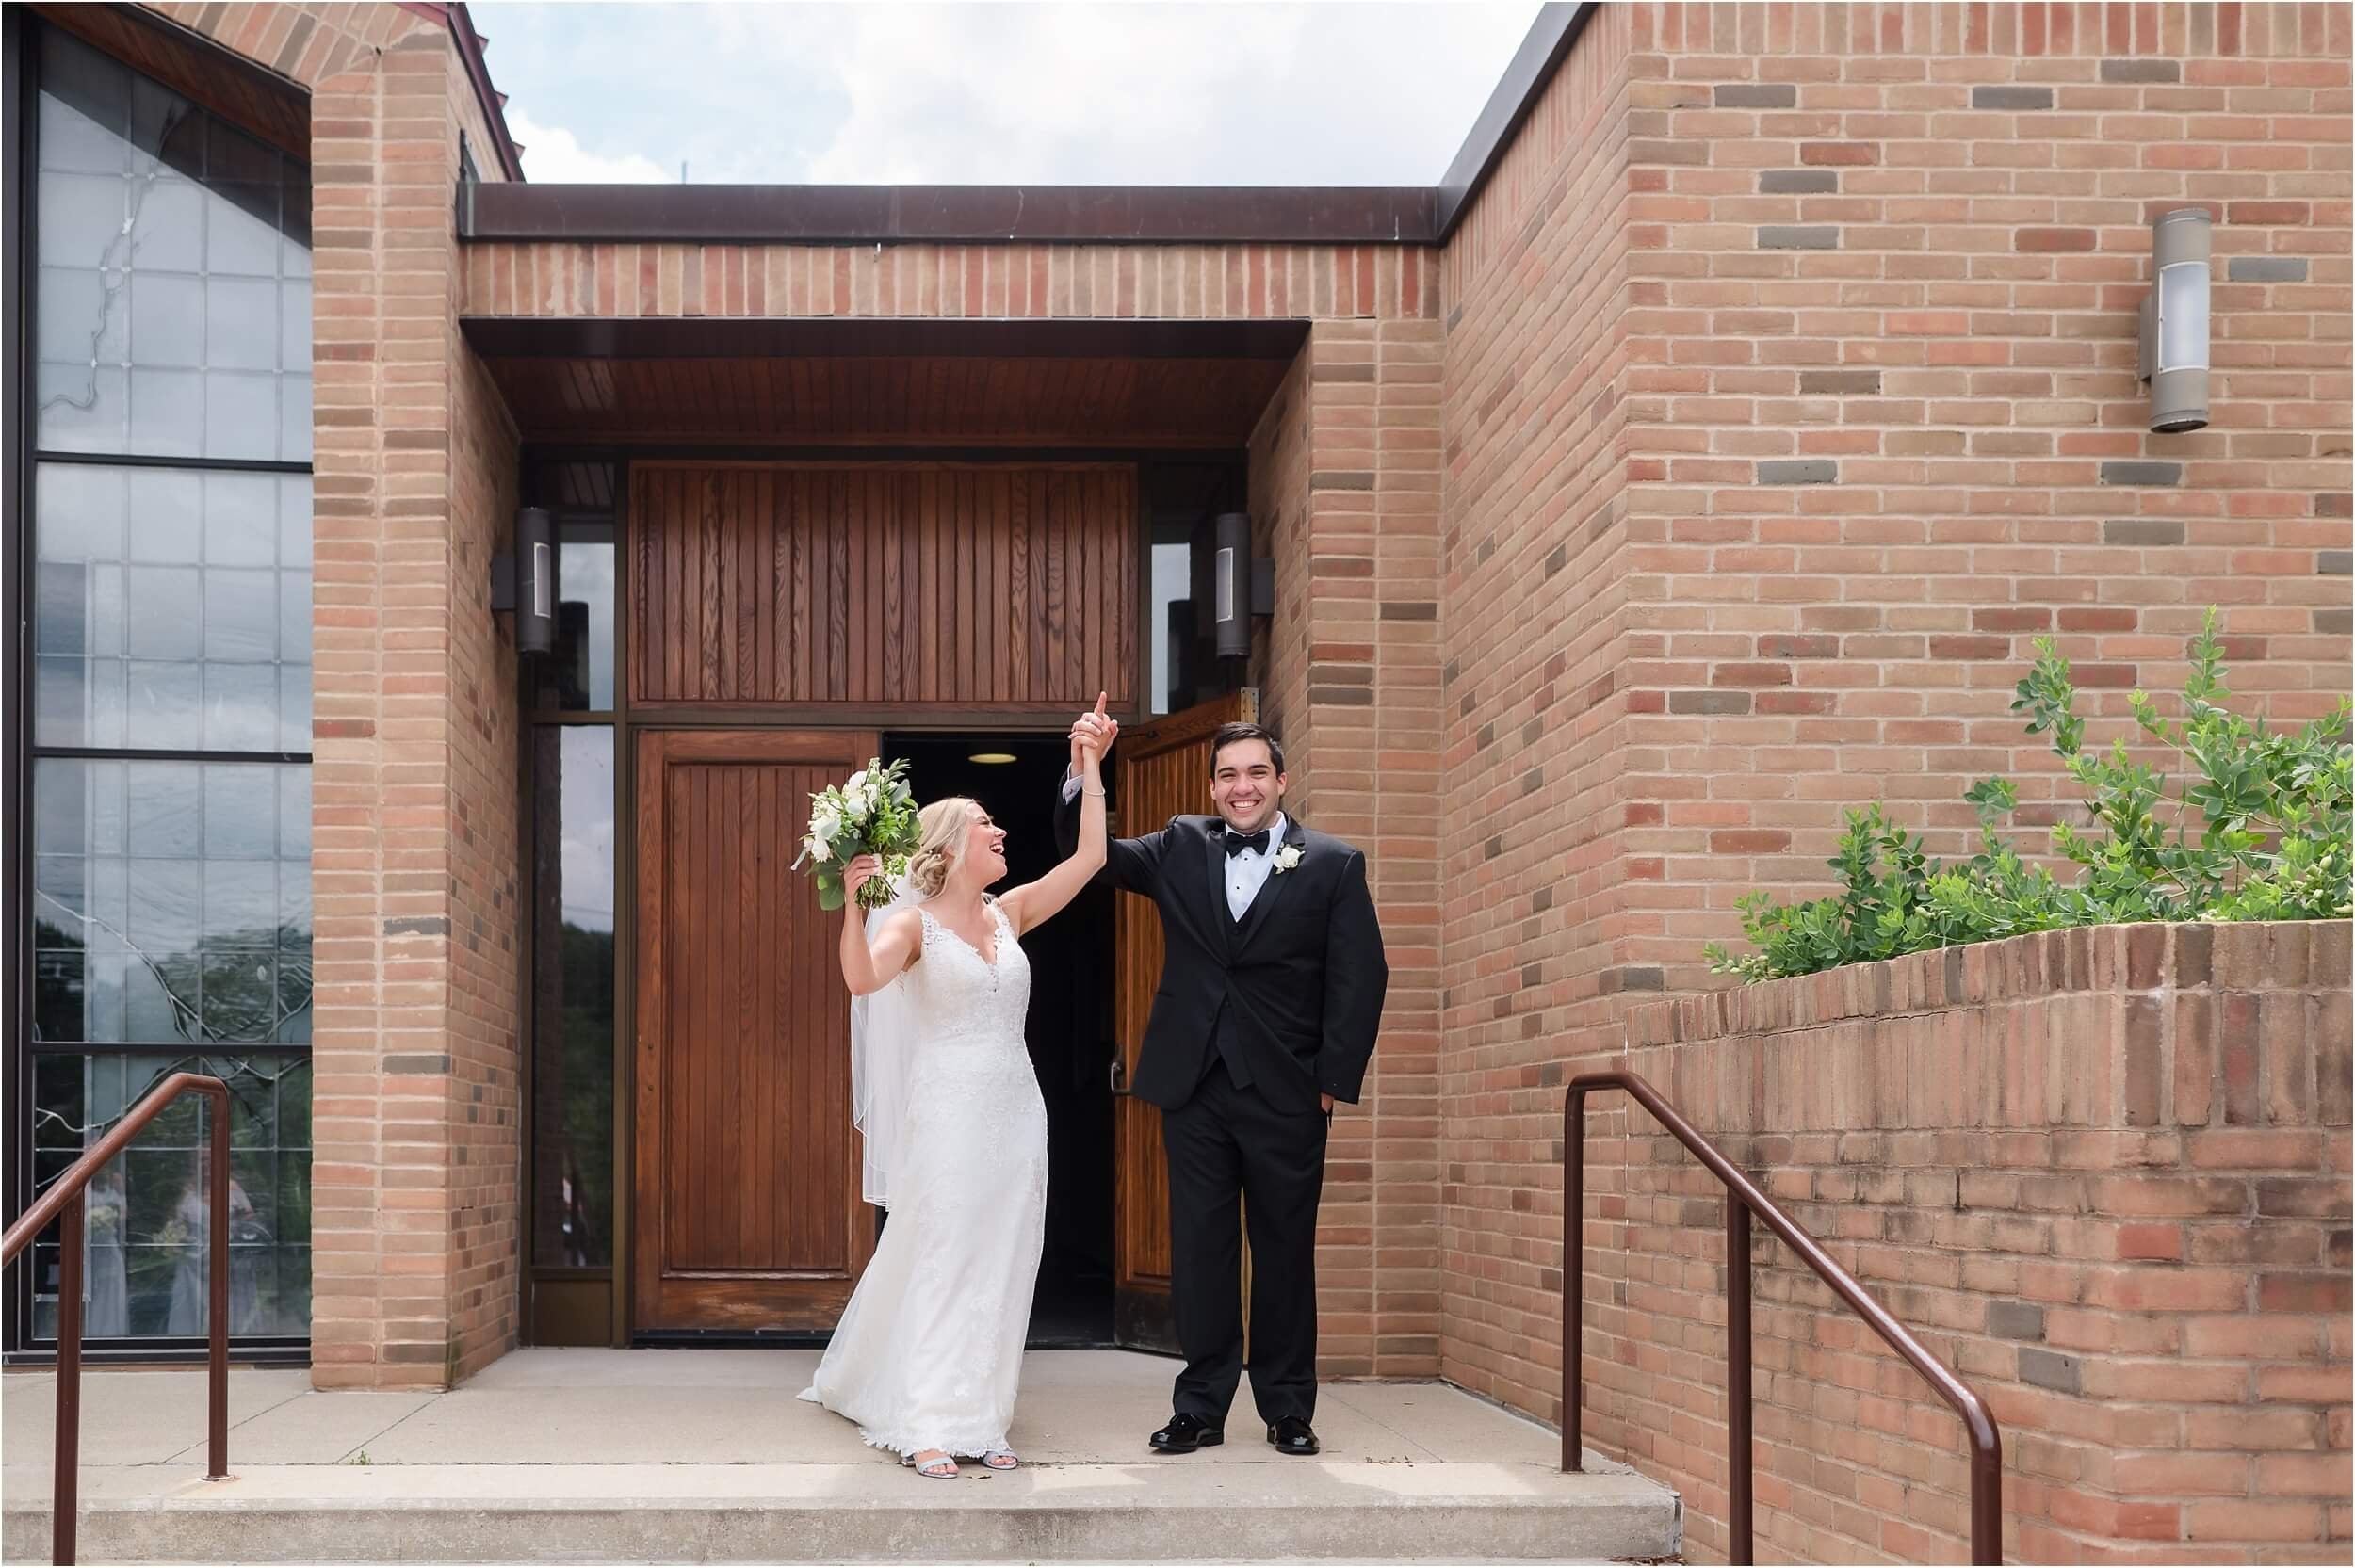  A couple excitedly leaves after their wedding at St Francis of Assisi church in Washtenaw county.  